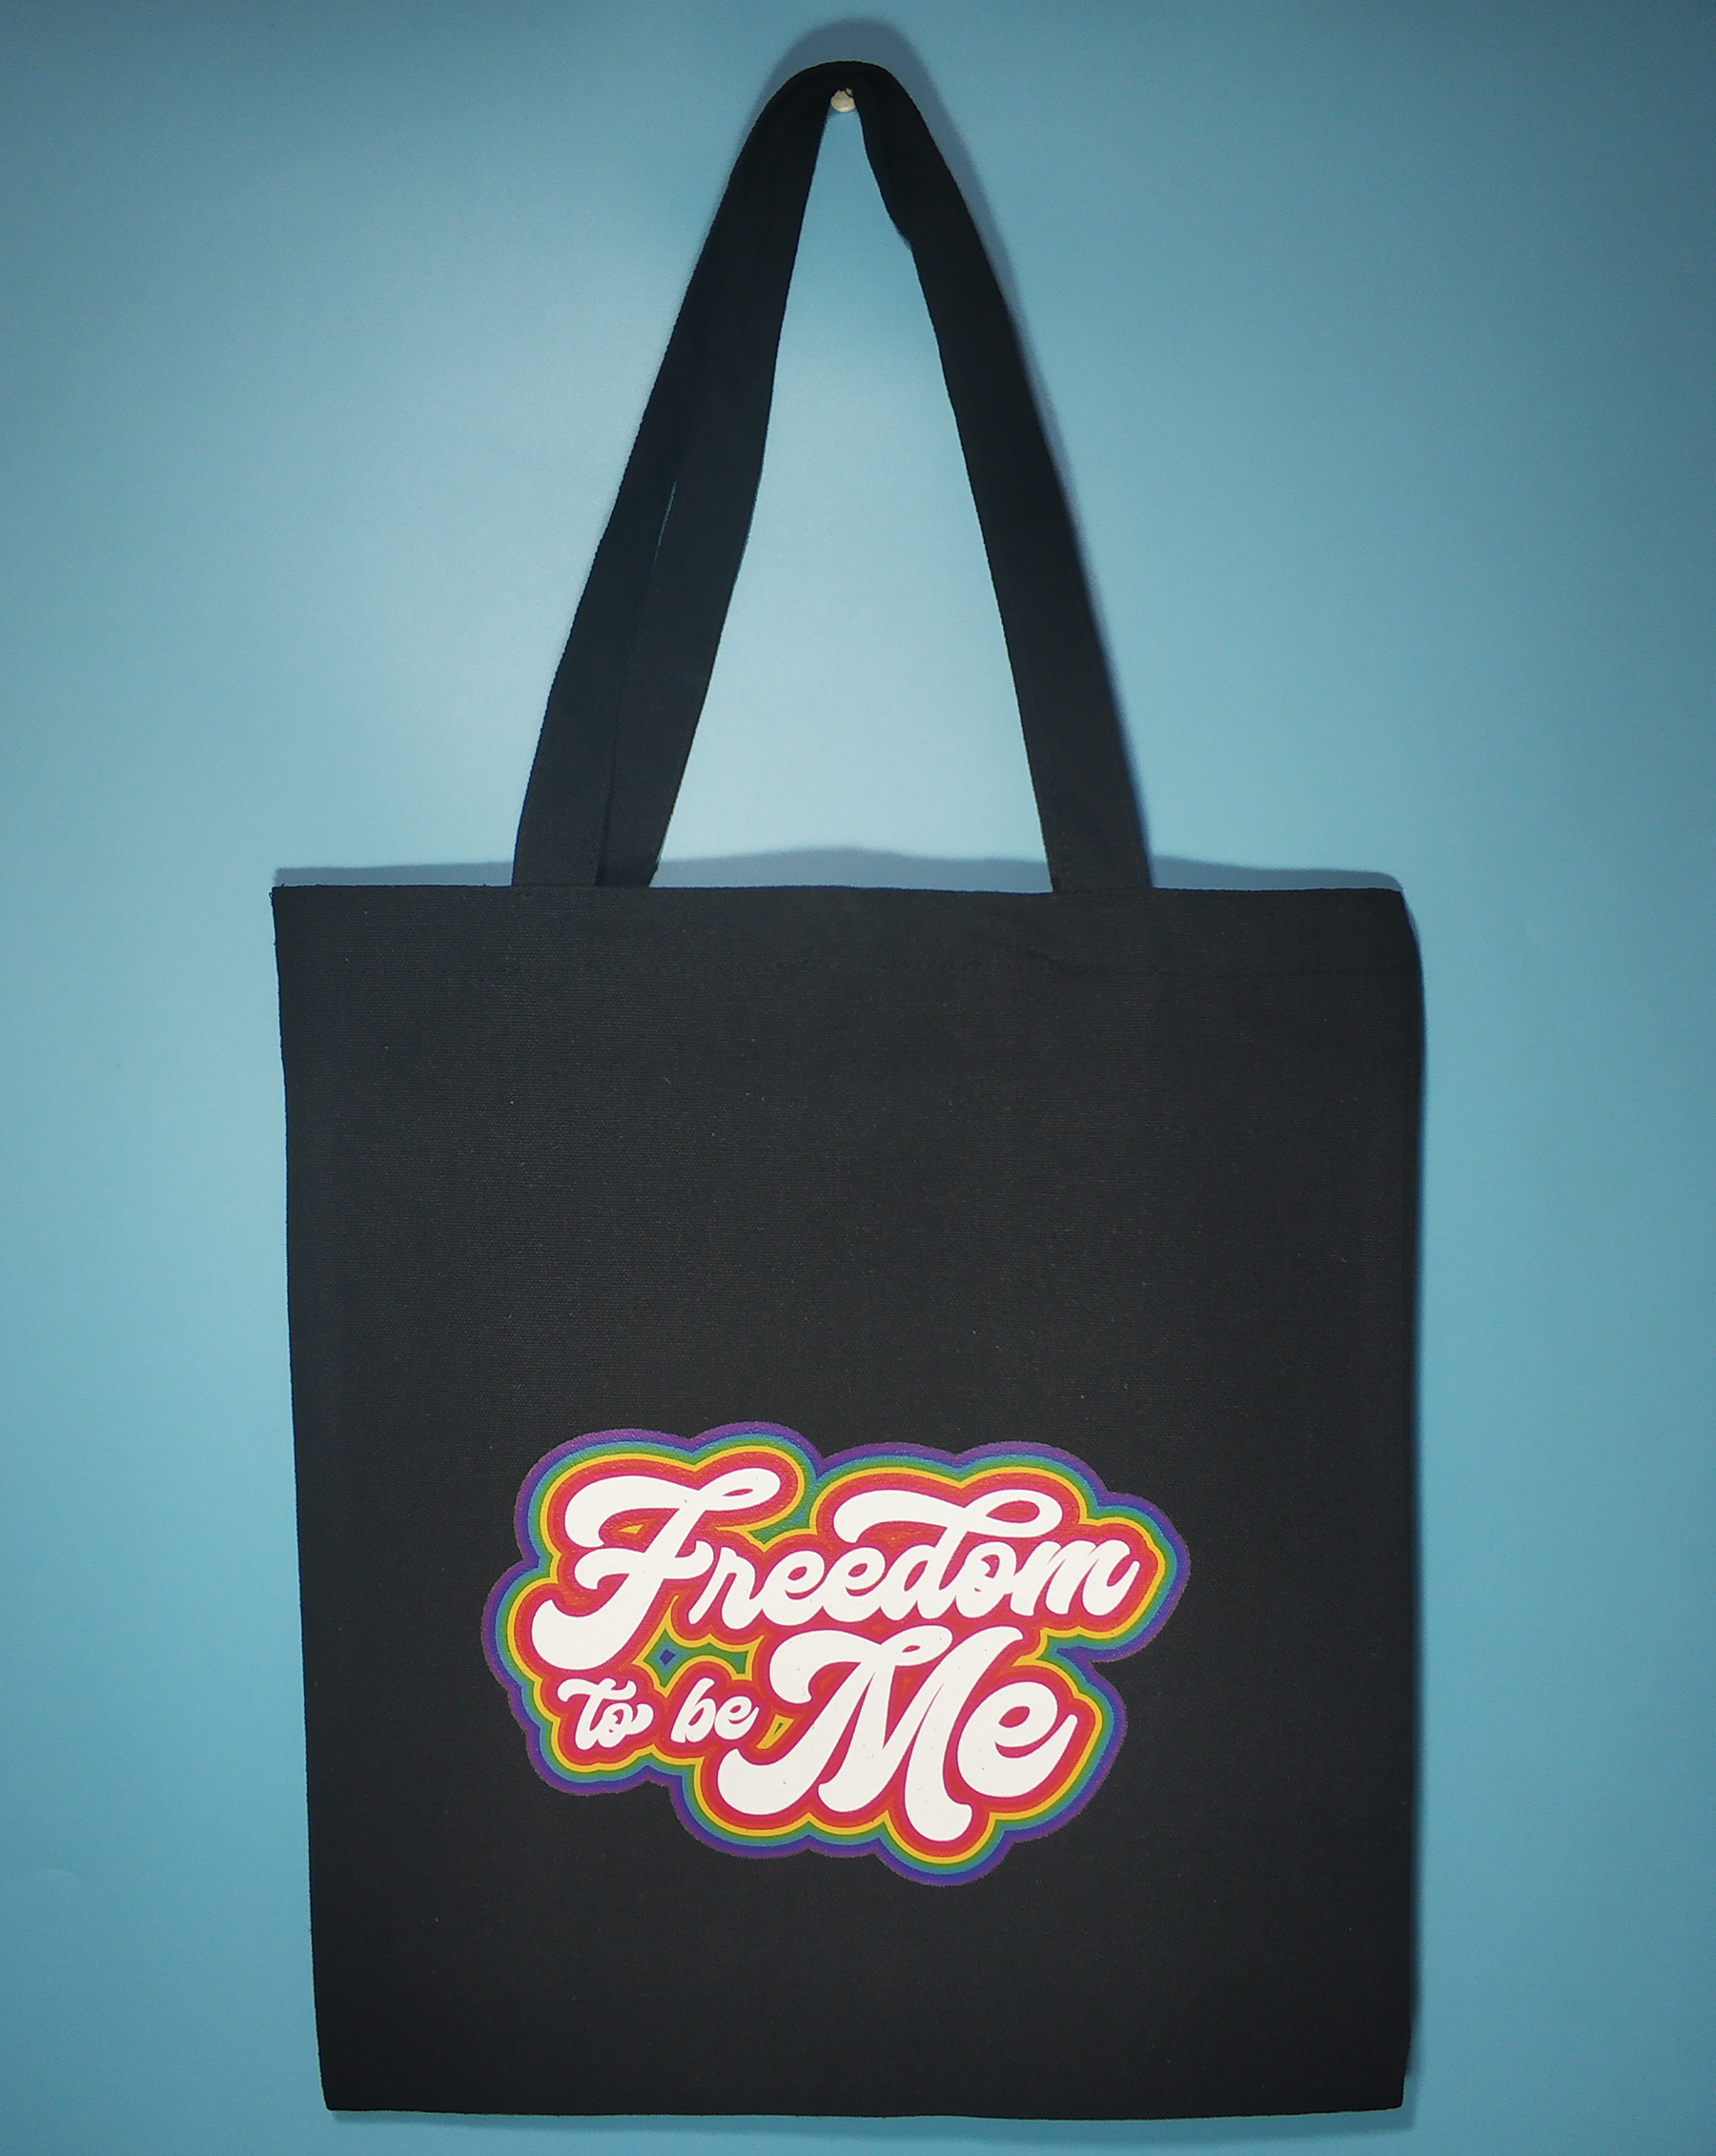 Advertising printed canvas tote bags 